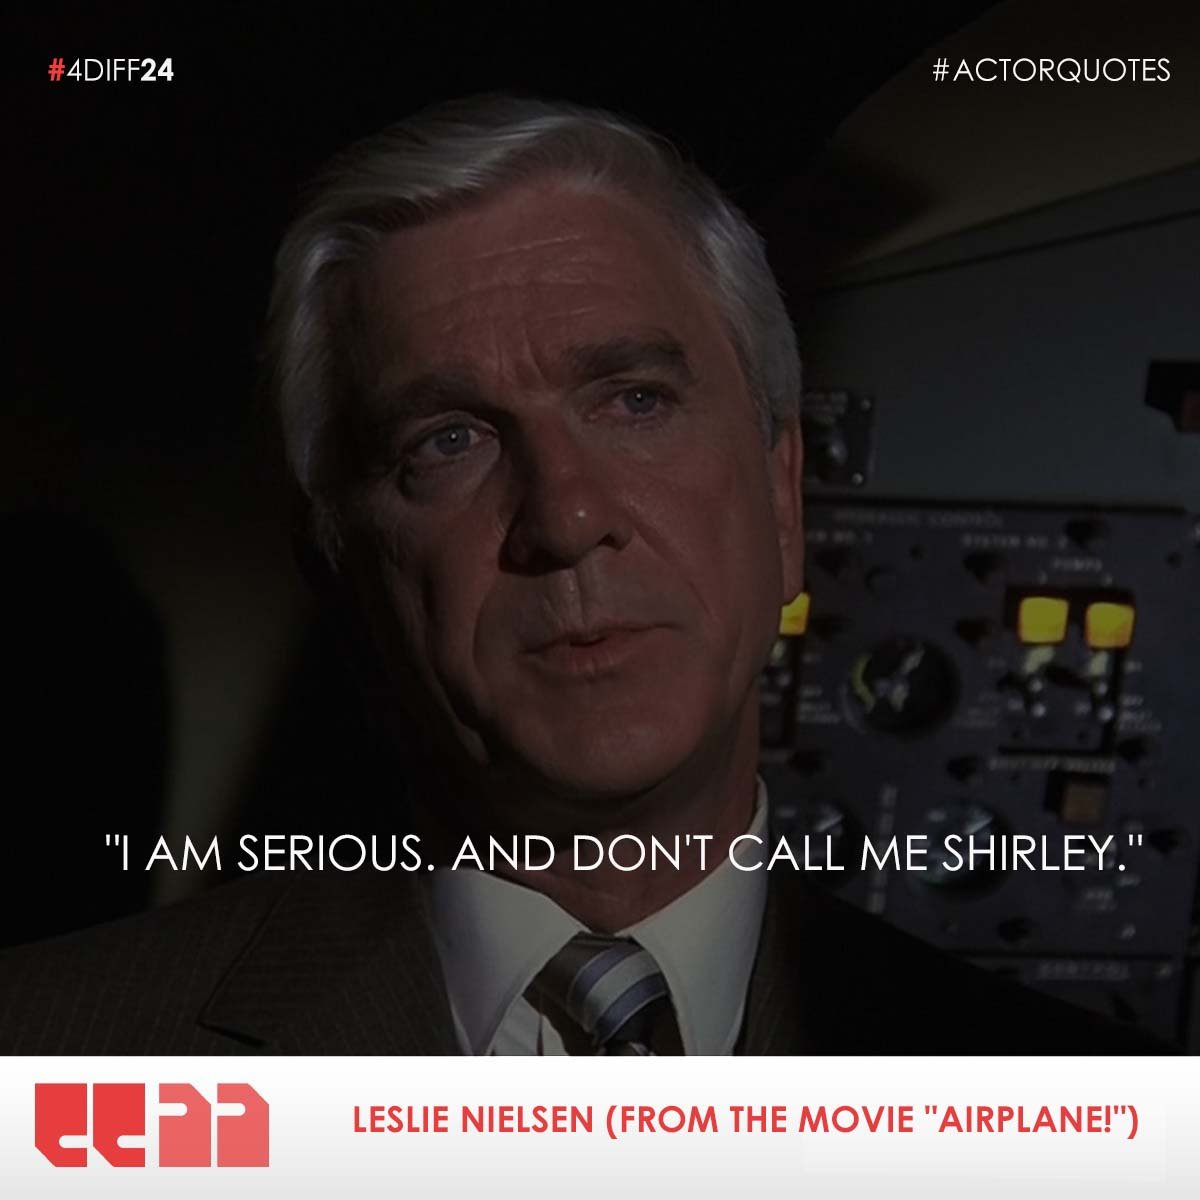 'I am serious. And don't call me shirley.' - Lesie Nielsen

#actorquotes #quotes #dailyquotes #fdiff #fdiff24